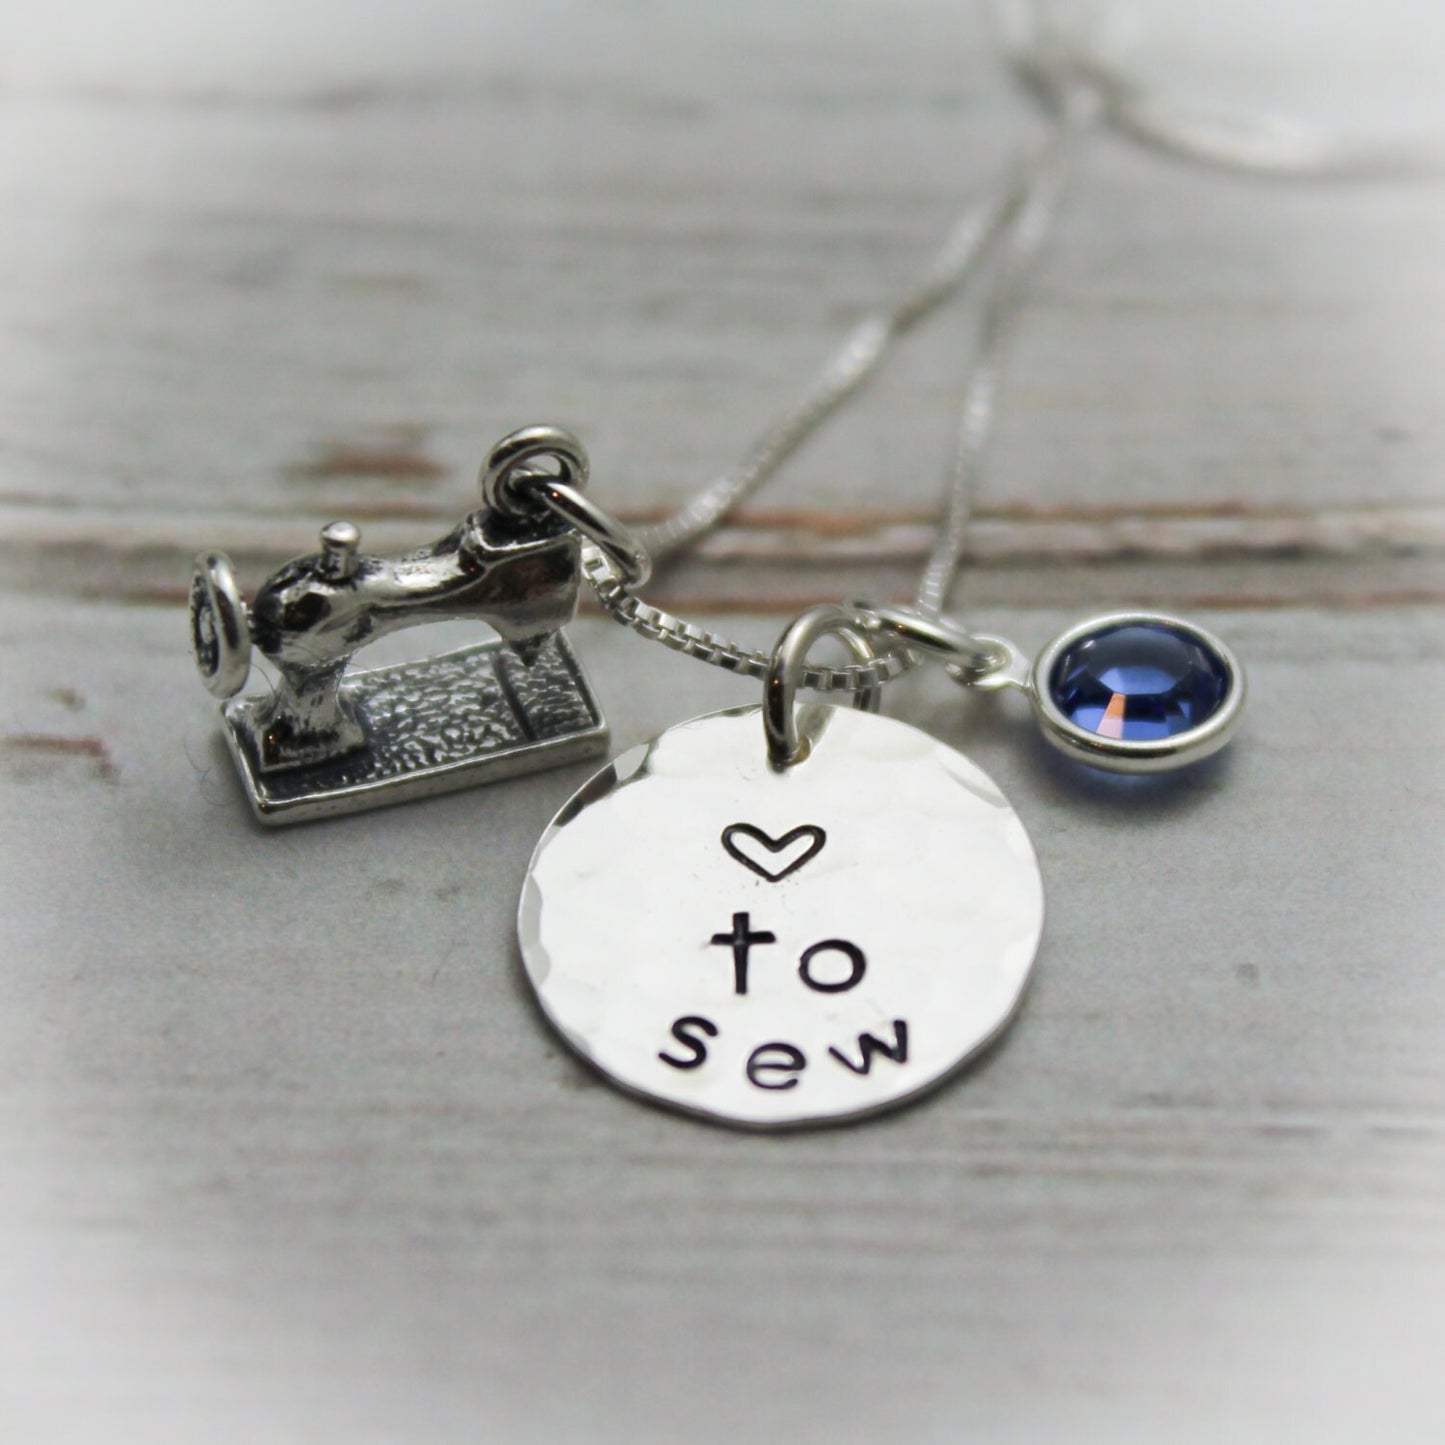 Love to Sew Necklace, Sewing Machine Necklace, Sewing Necklace, Gift for Sewer, Sterling Silver Personalized Hand Stamped Necklace